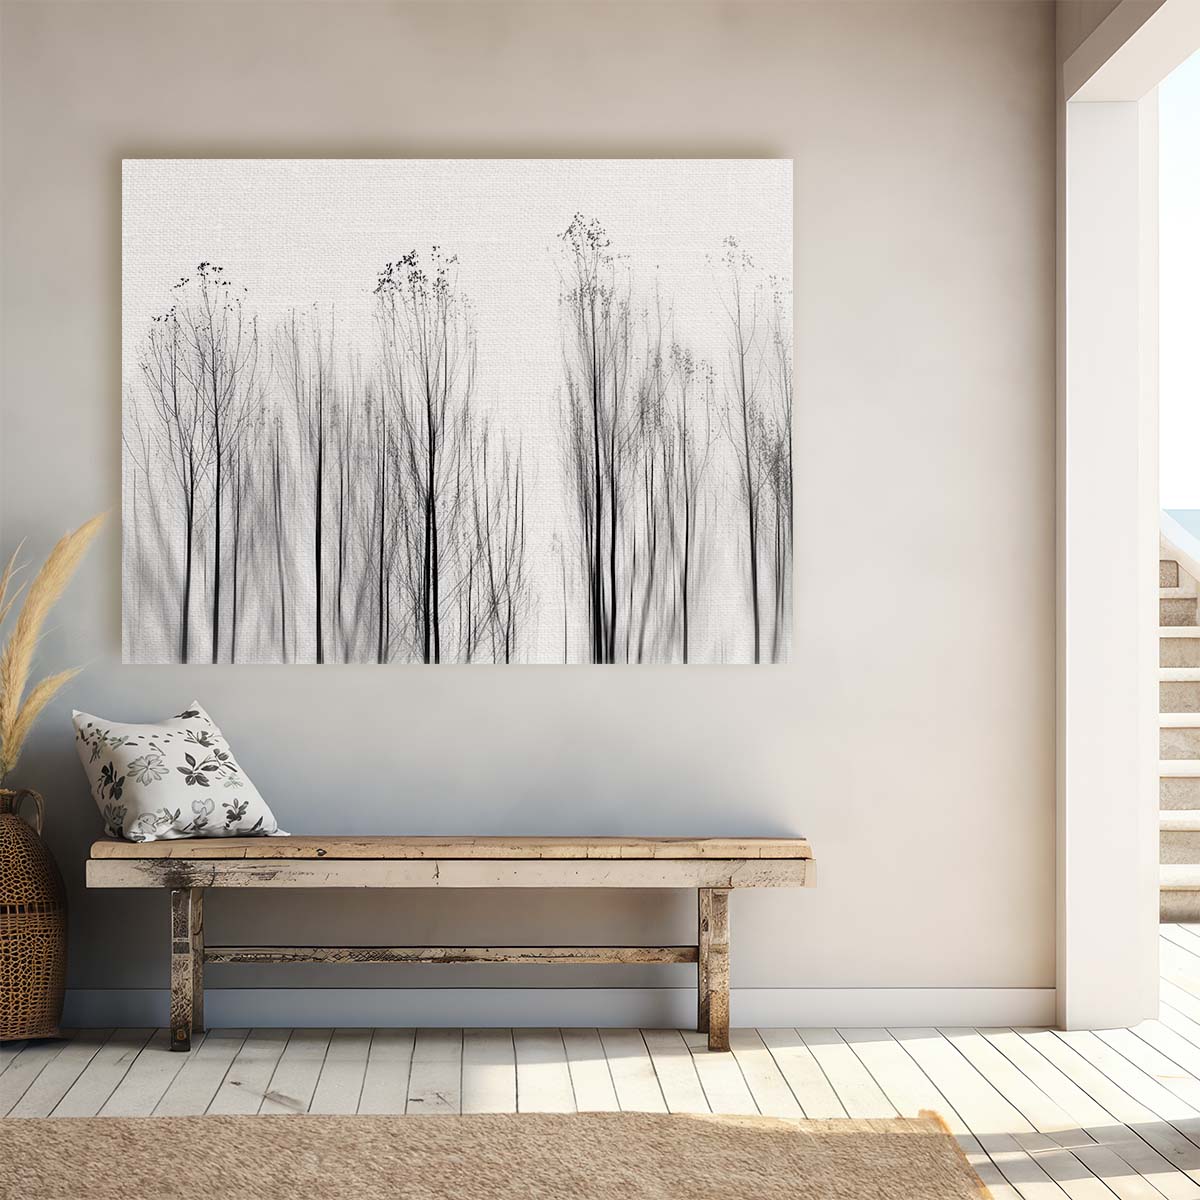 Monochrome Portugal Landscape Trees Wall Art by Luxuriance Designs. Made in USA.